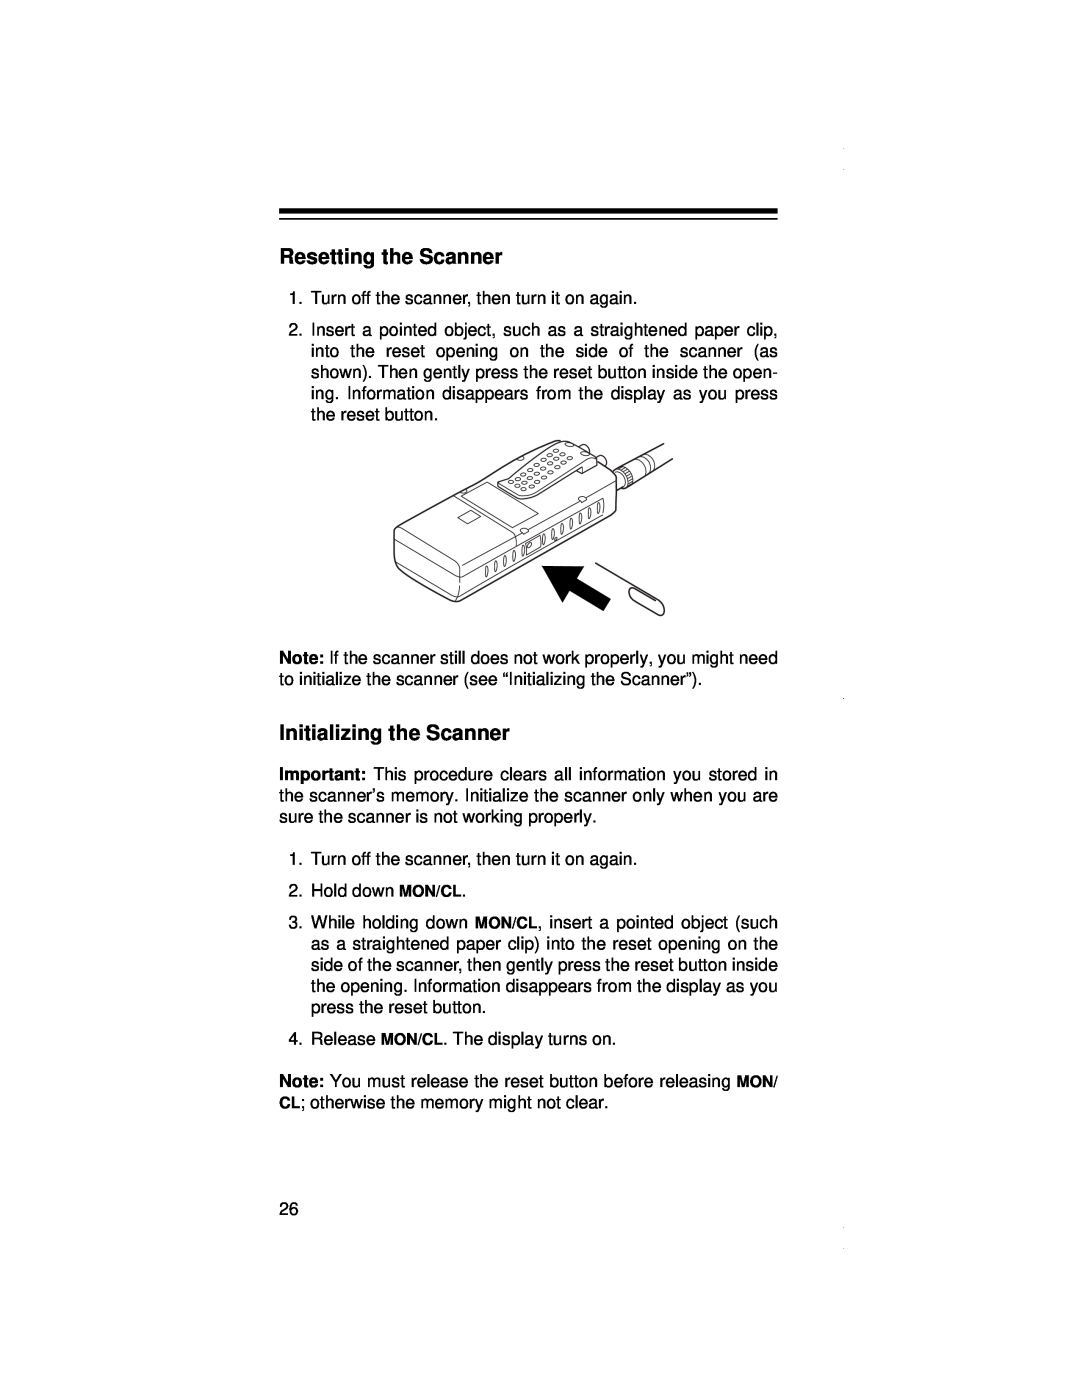 Radio Shack PRO-79 owner manual Resetting the Scanner, Initializing the Scanner 